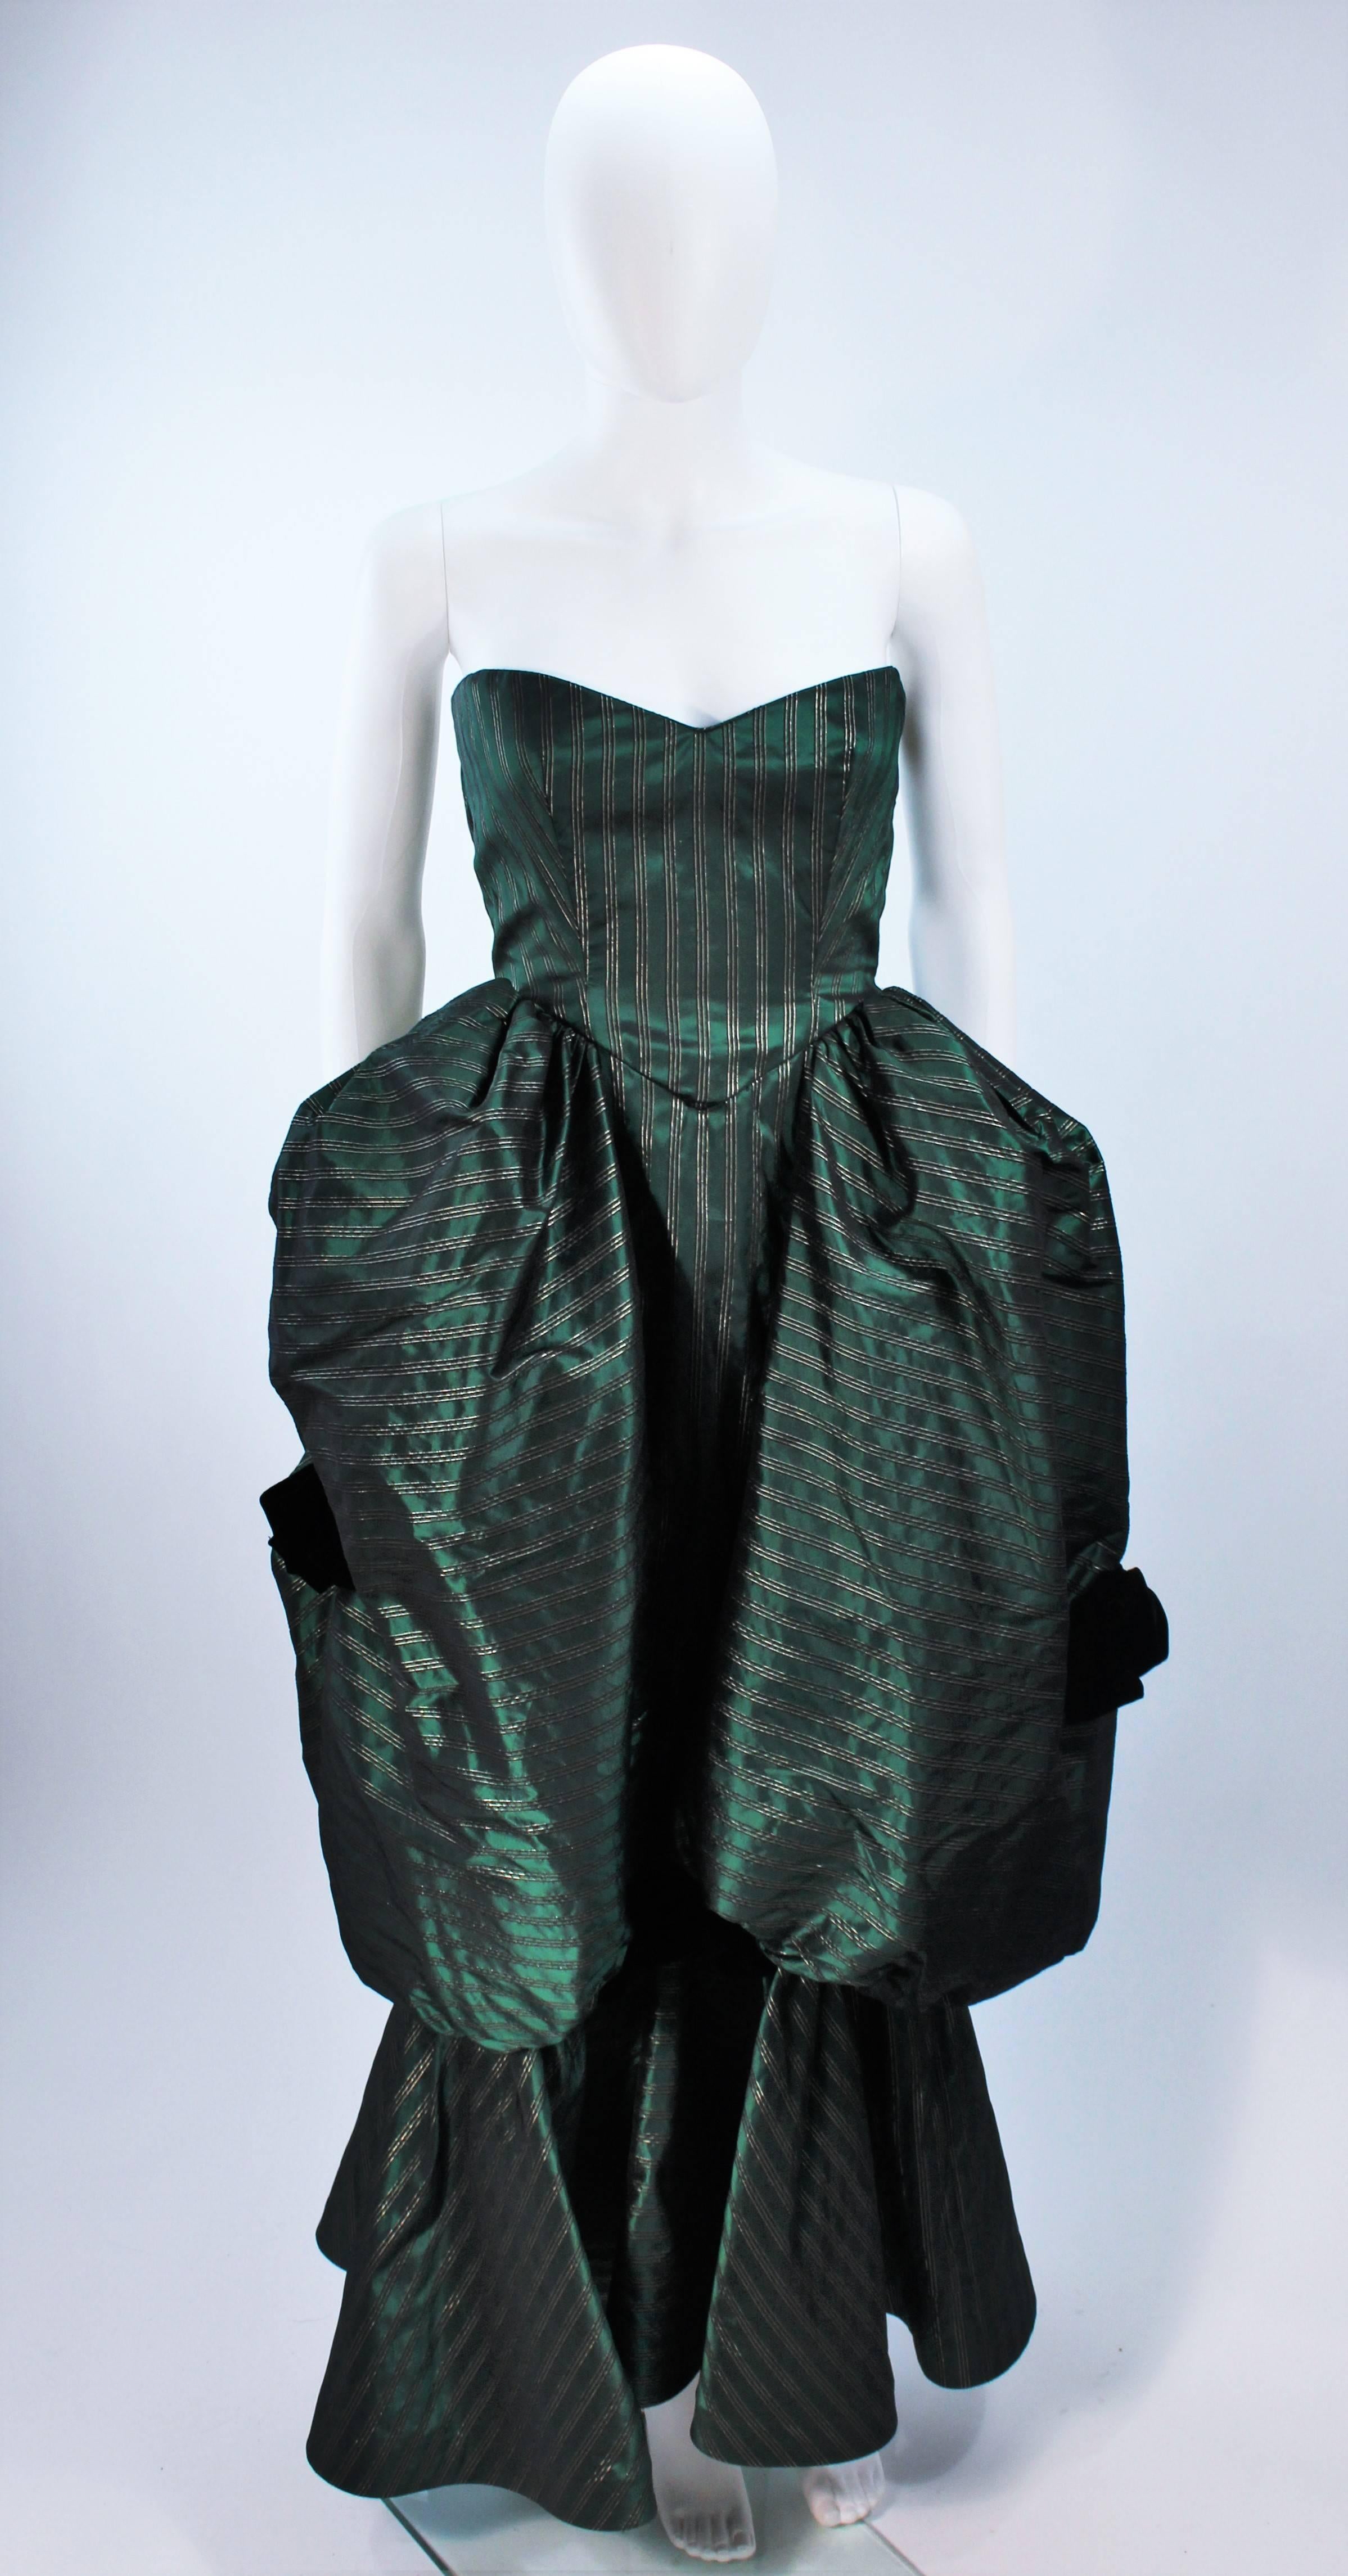  This Michael Novarese  gown is composed of a green striped satin with gold accenting. Features a sweetheart neckline, structured side poufs, and velvet bows. There is a center back zipper closure. In excellent vintage condition. 

  **Please